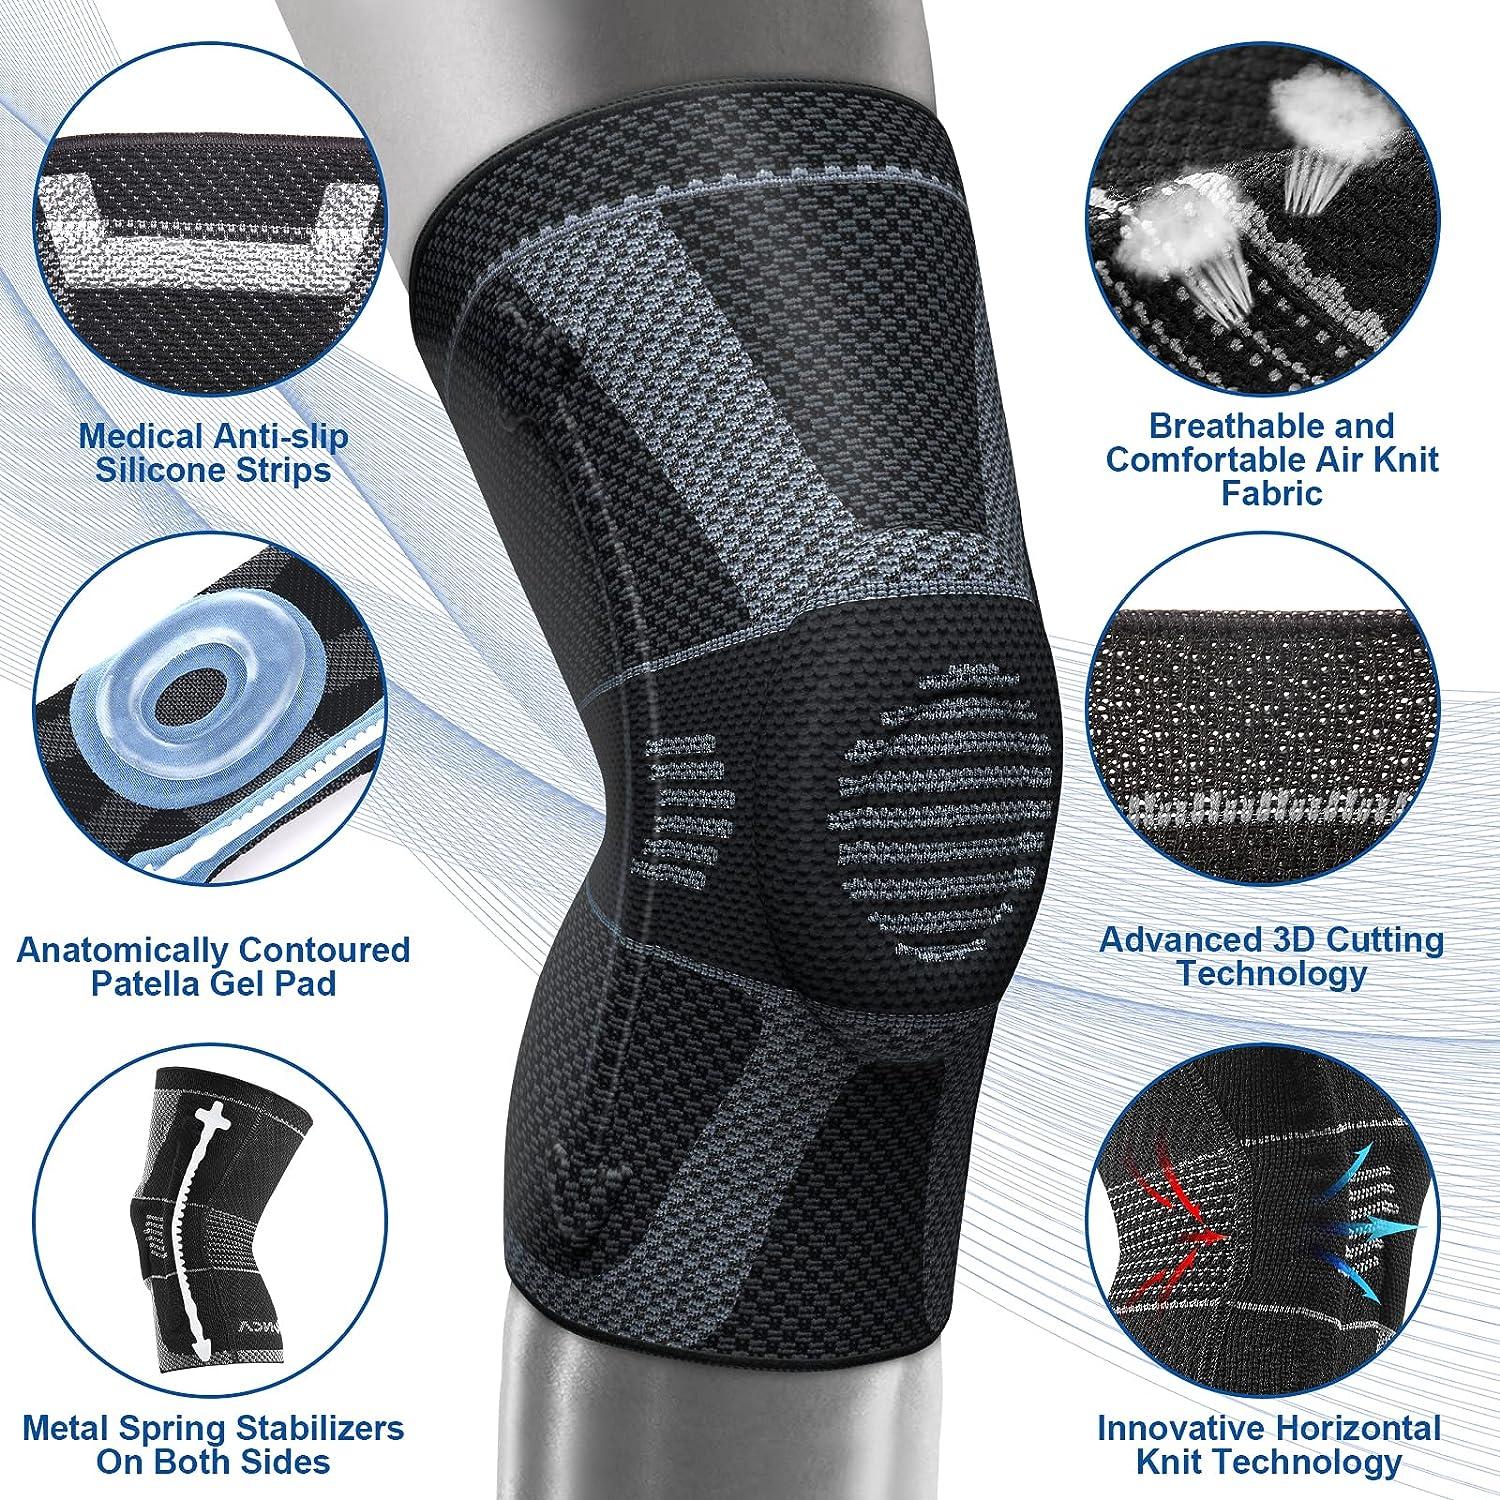 NEENCA Professional Knee Brace, Compression Knee Sleeve with